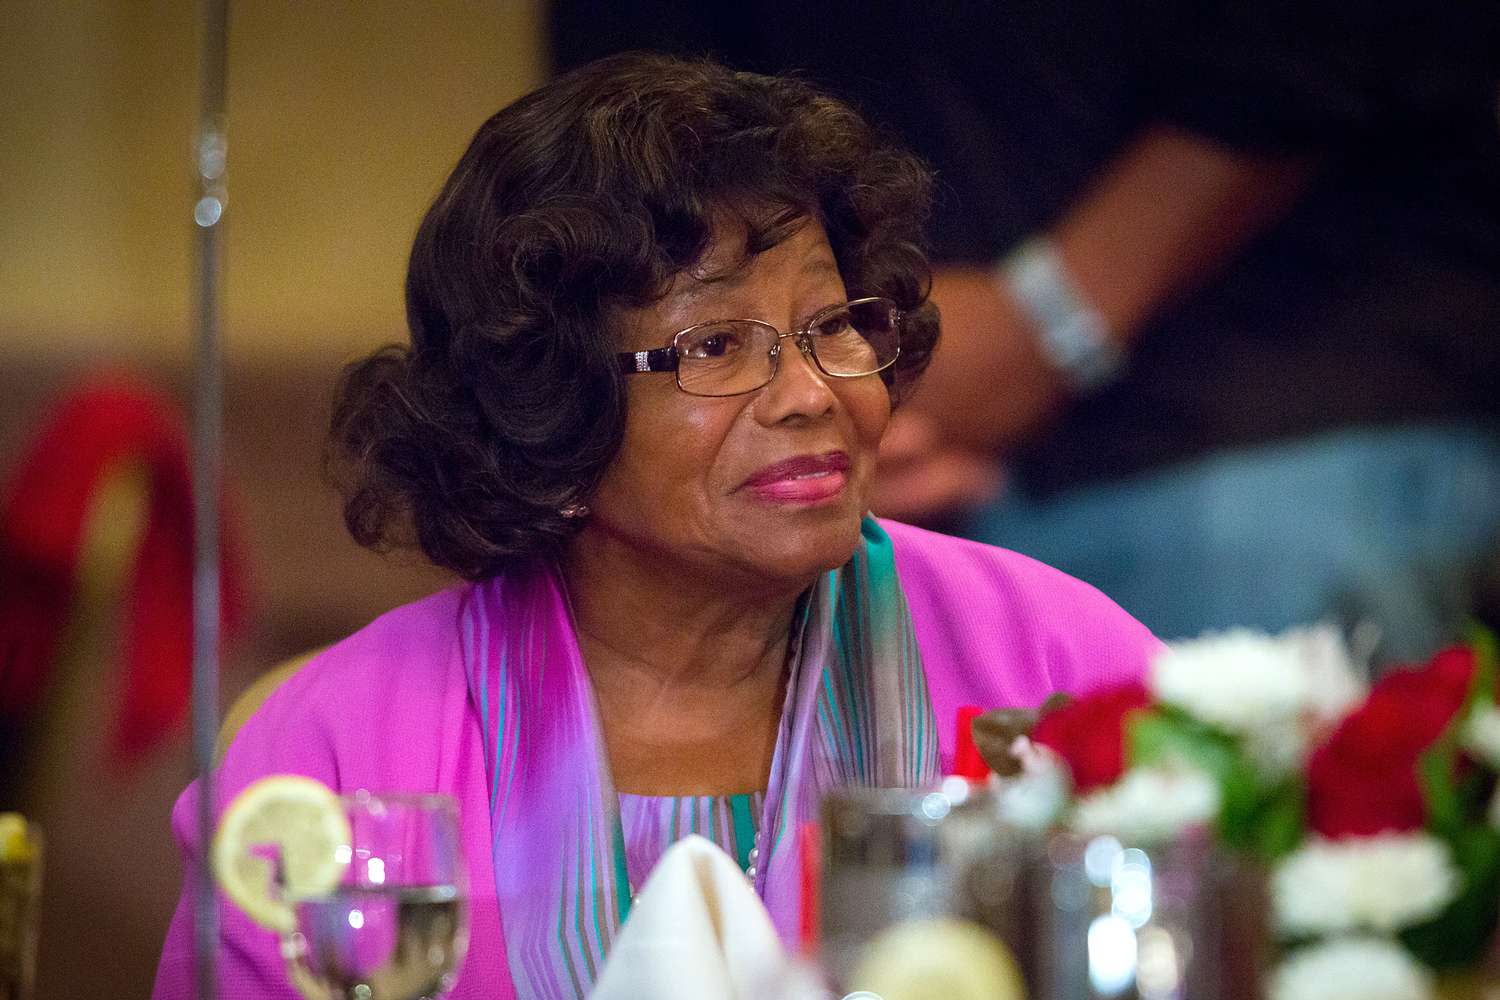 Katherine Jackson appears at "Goin' Back to Indiana: Can You Feel It" the Gary, Indiana Chamber of Commerce's event honoring Katherine Jackson at the Majestic Star Casino & Hotel on August 31, 2012 in Gary, Indiana